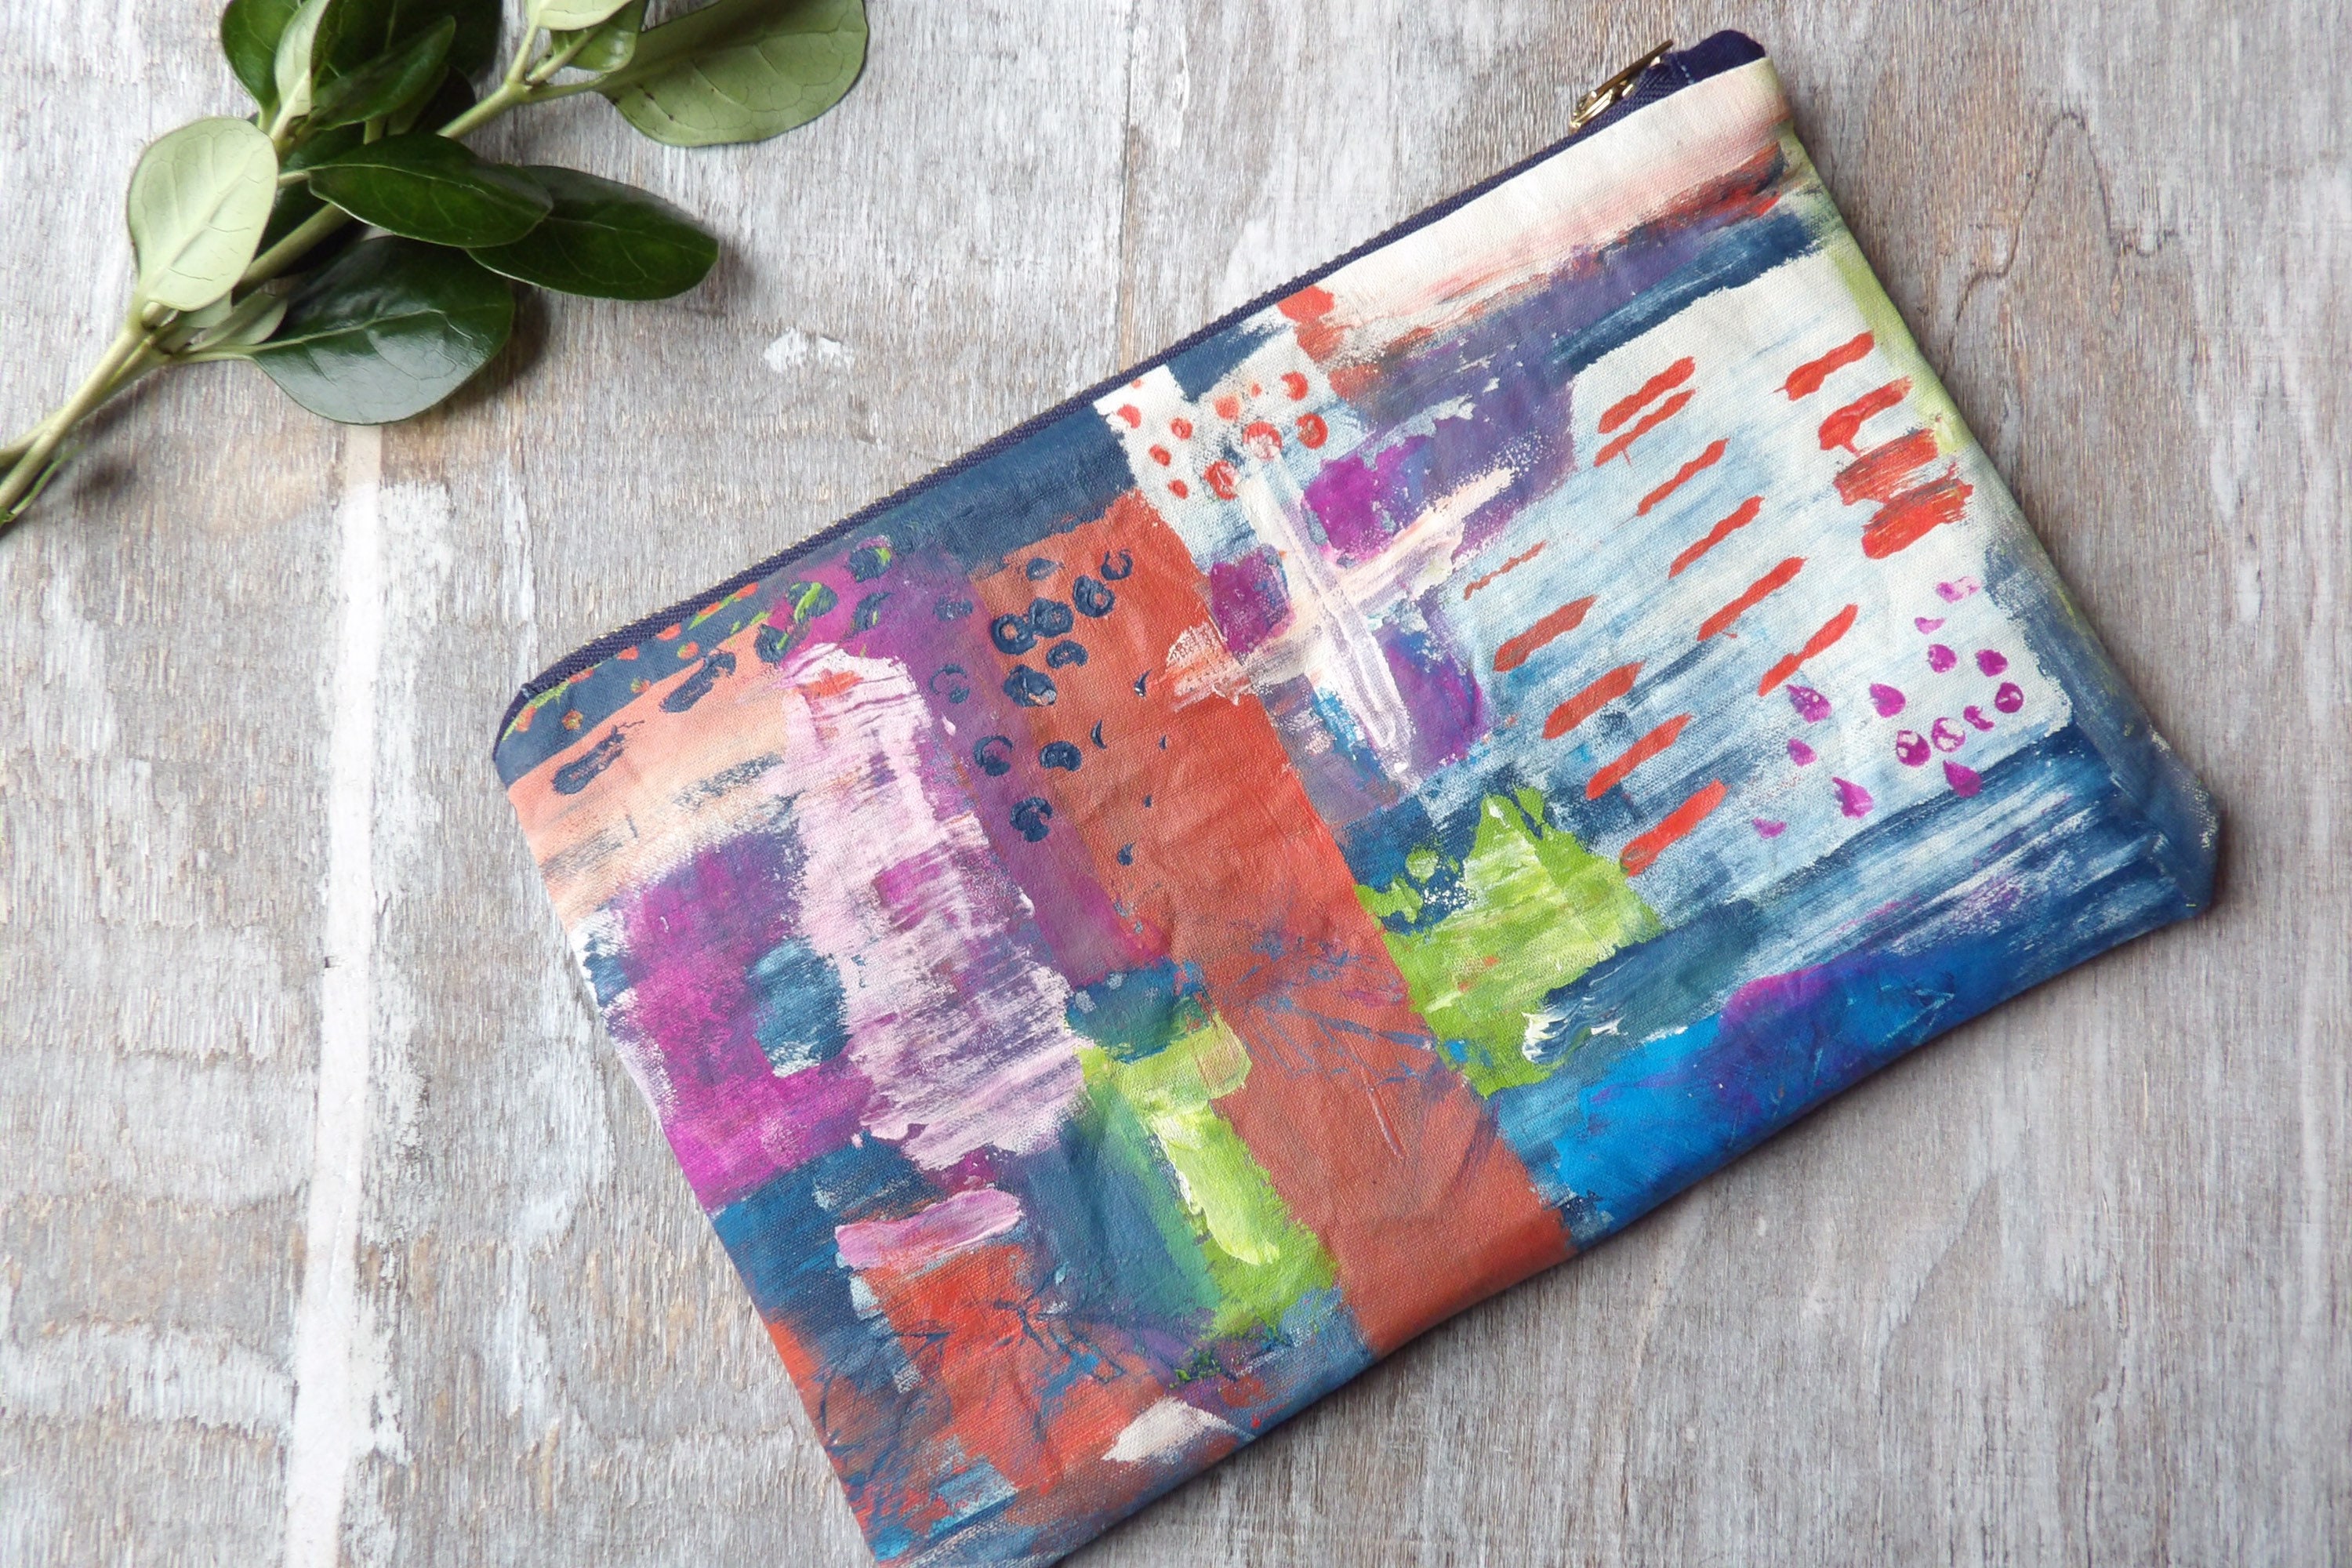 Messy Artsy Hand Painted Zipper Pencil Pouch One of a Kind ARTIST